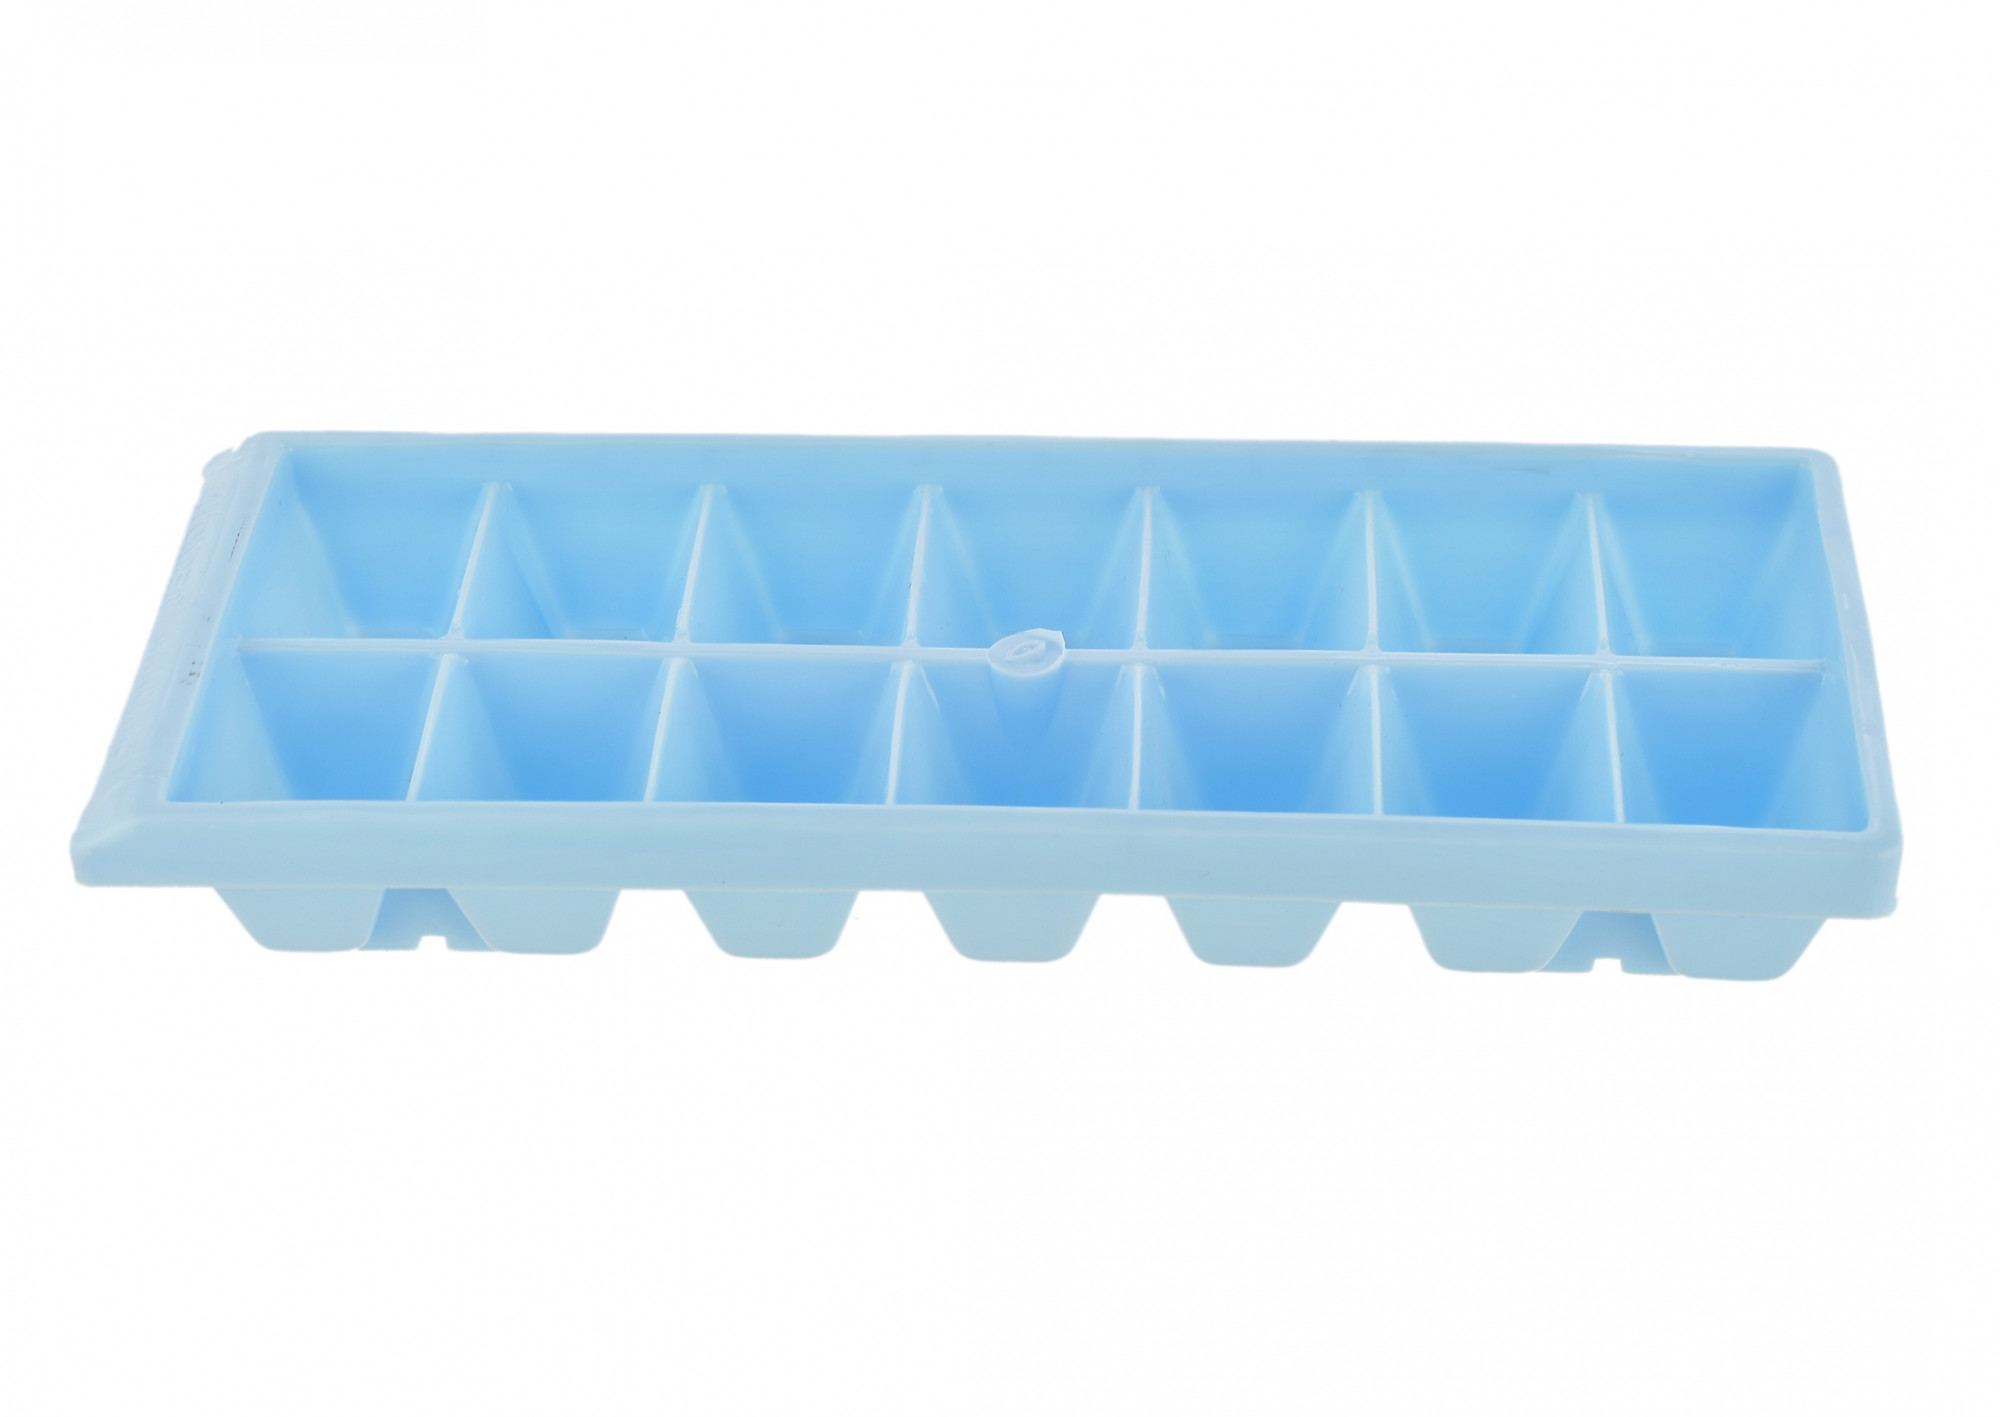 Kuber Industries Plastic Ice Cube Tray Set With 14 Section- (Cream & Blue)-HS43KUBMART25785